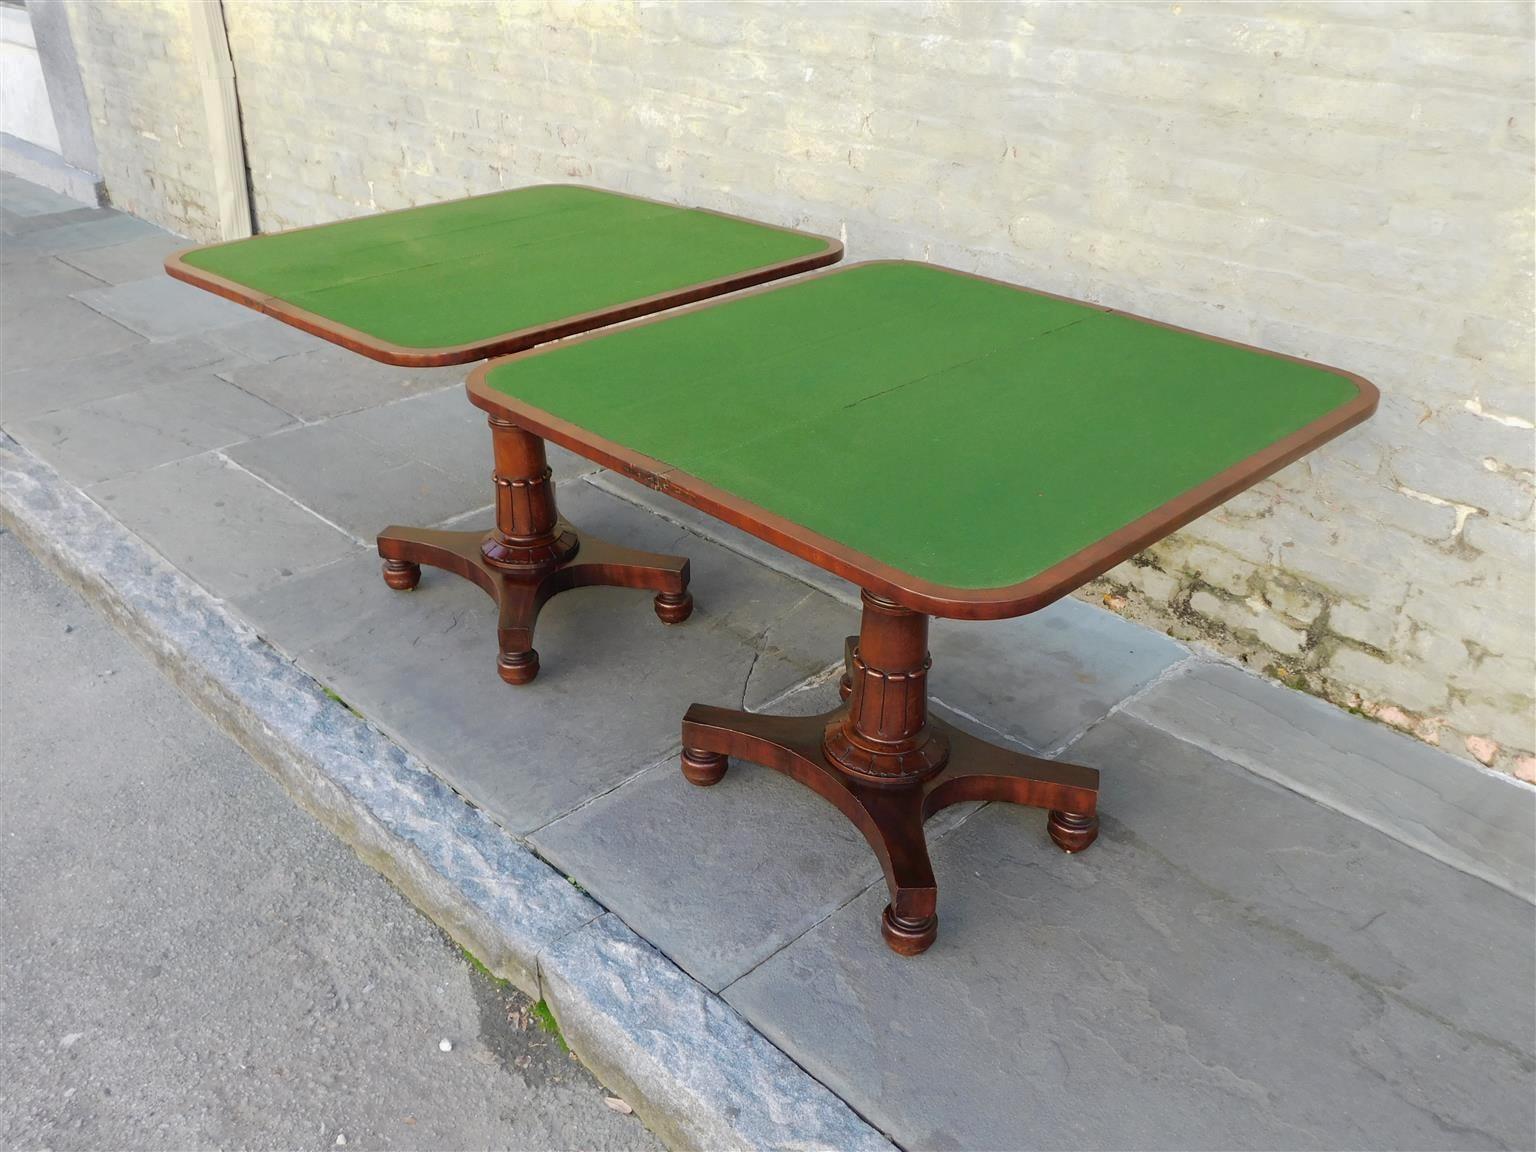 Pair of English Mahogany Pedestal Hinged Game Tables on Brass Casters, C. 1820 For Sale 2